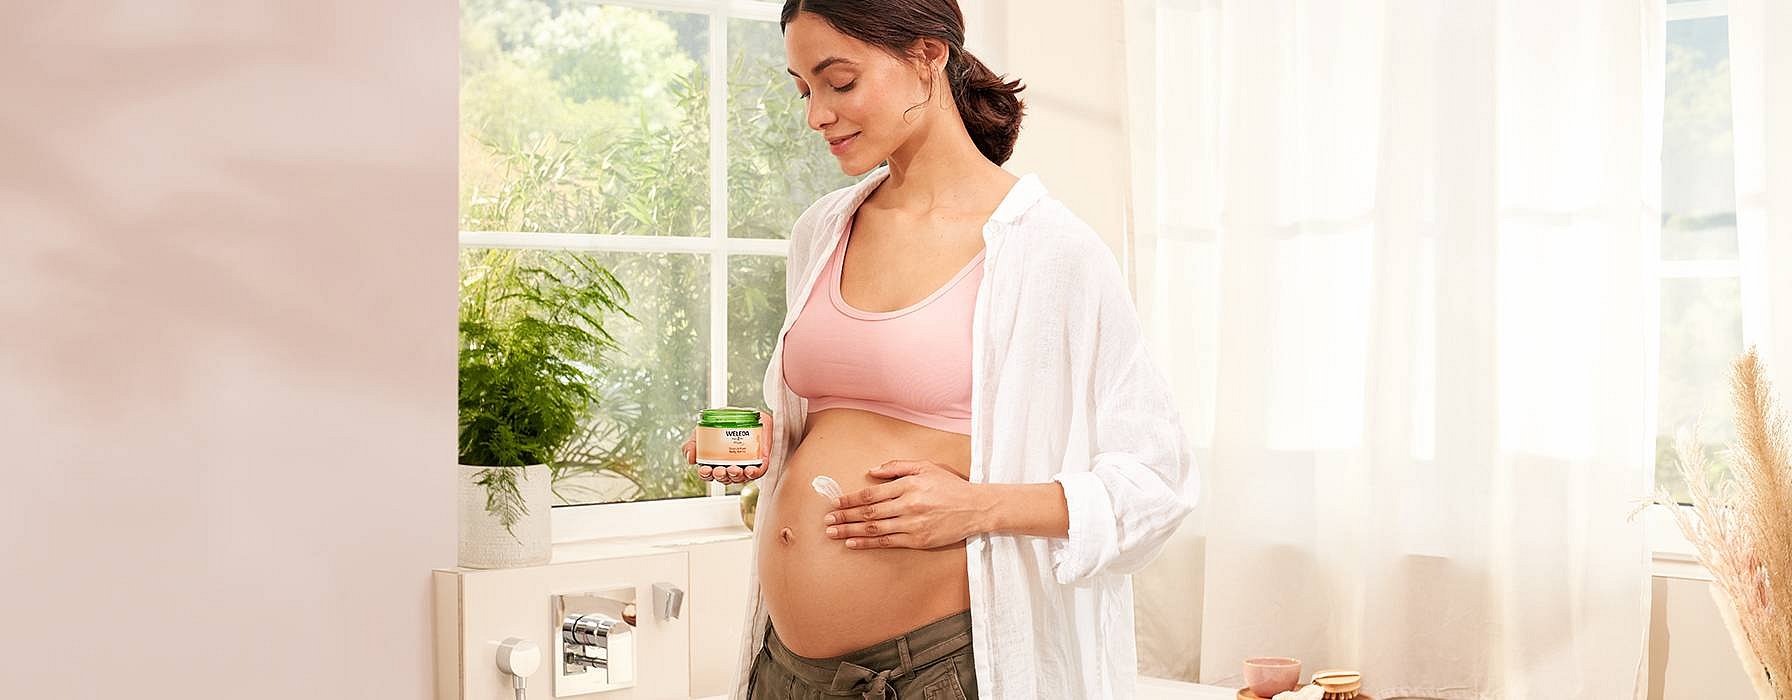 hd_pregnant_woman_creaming_belly